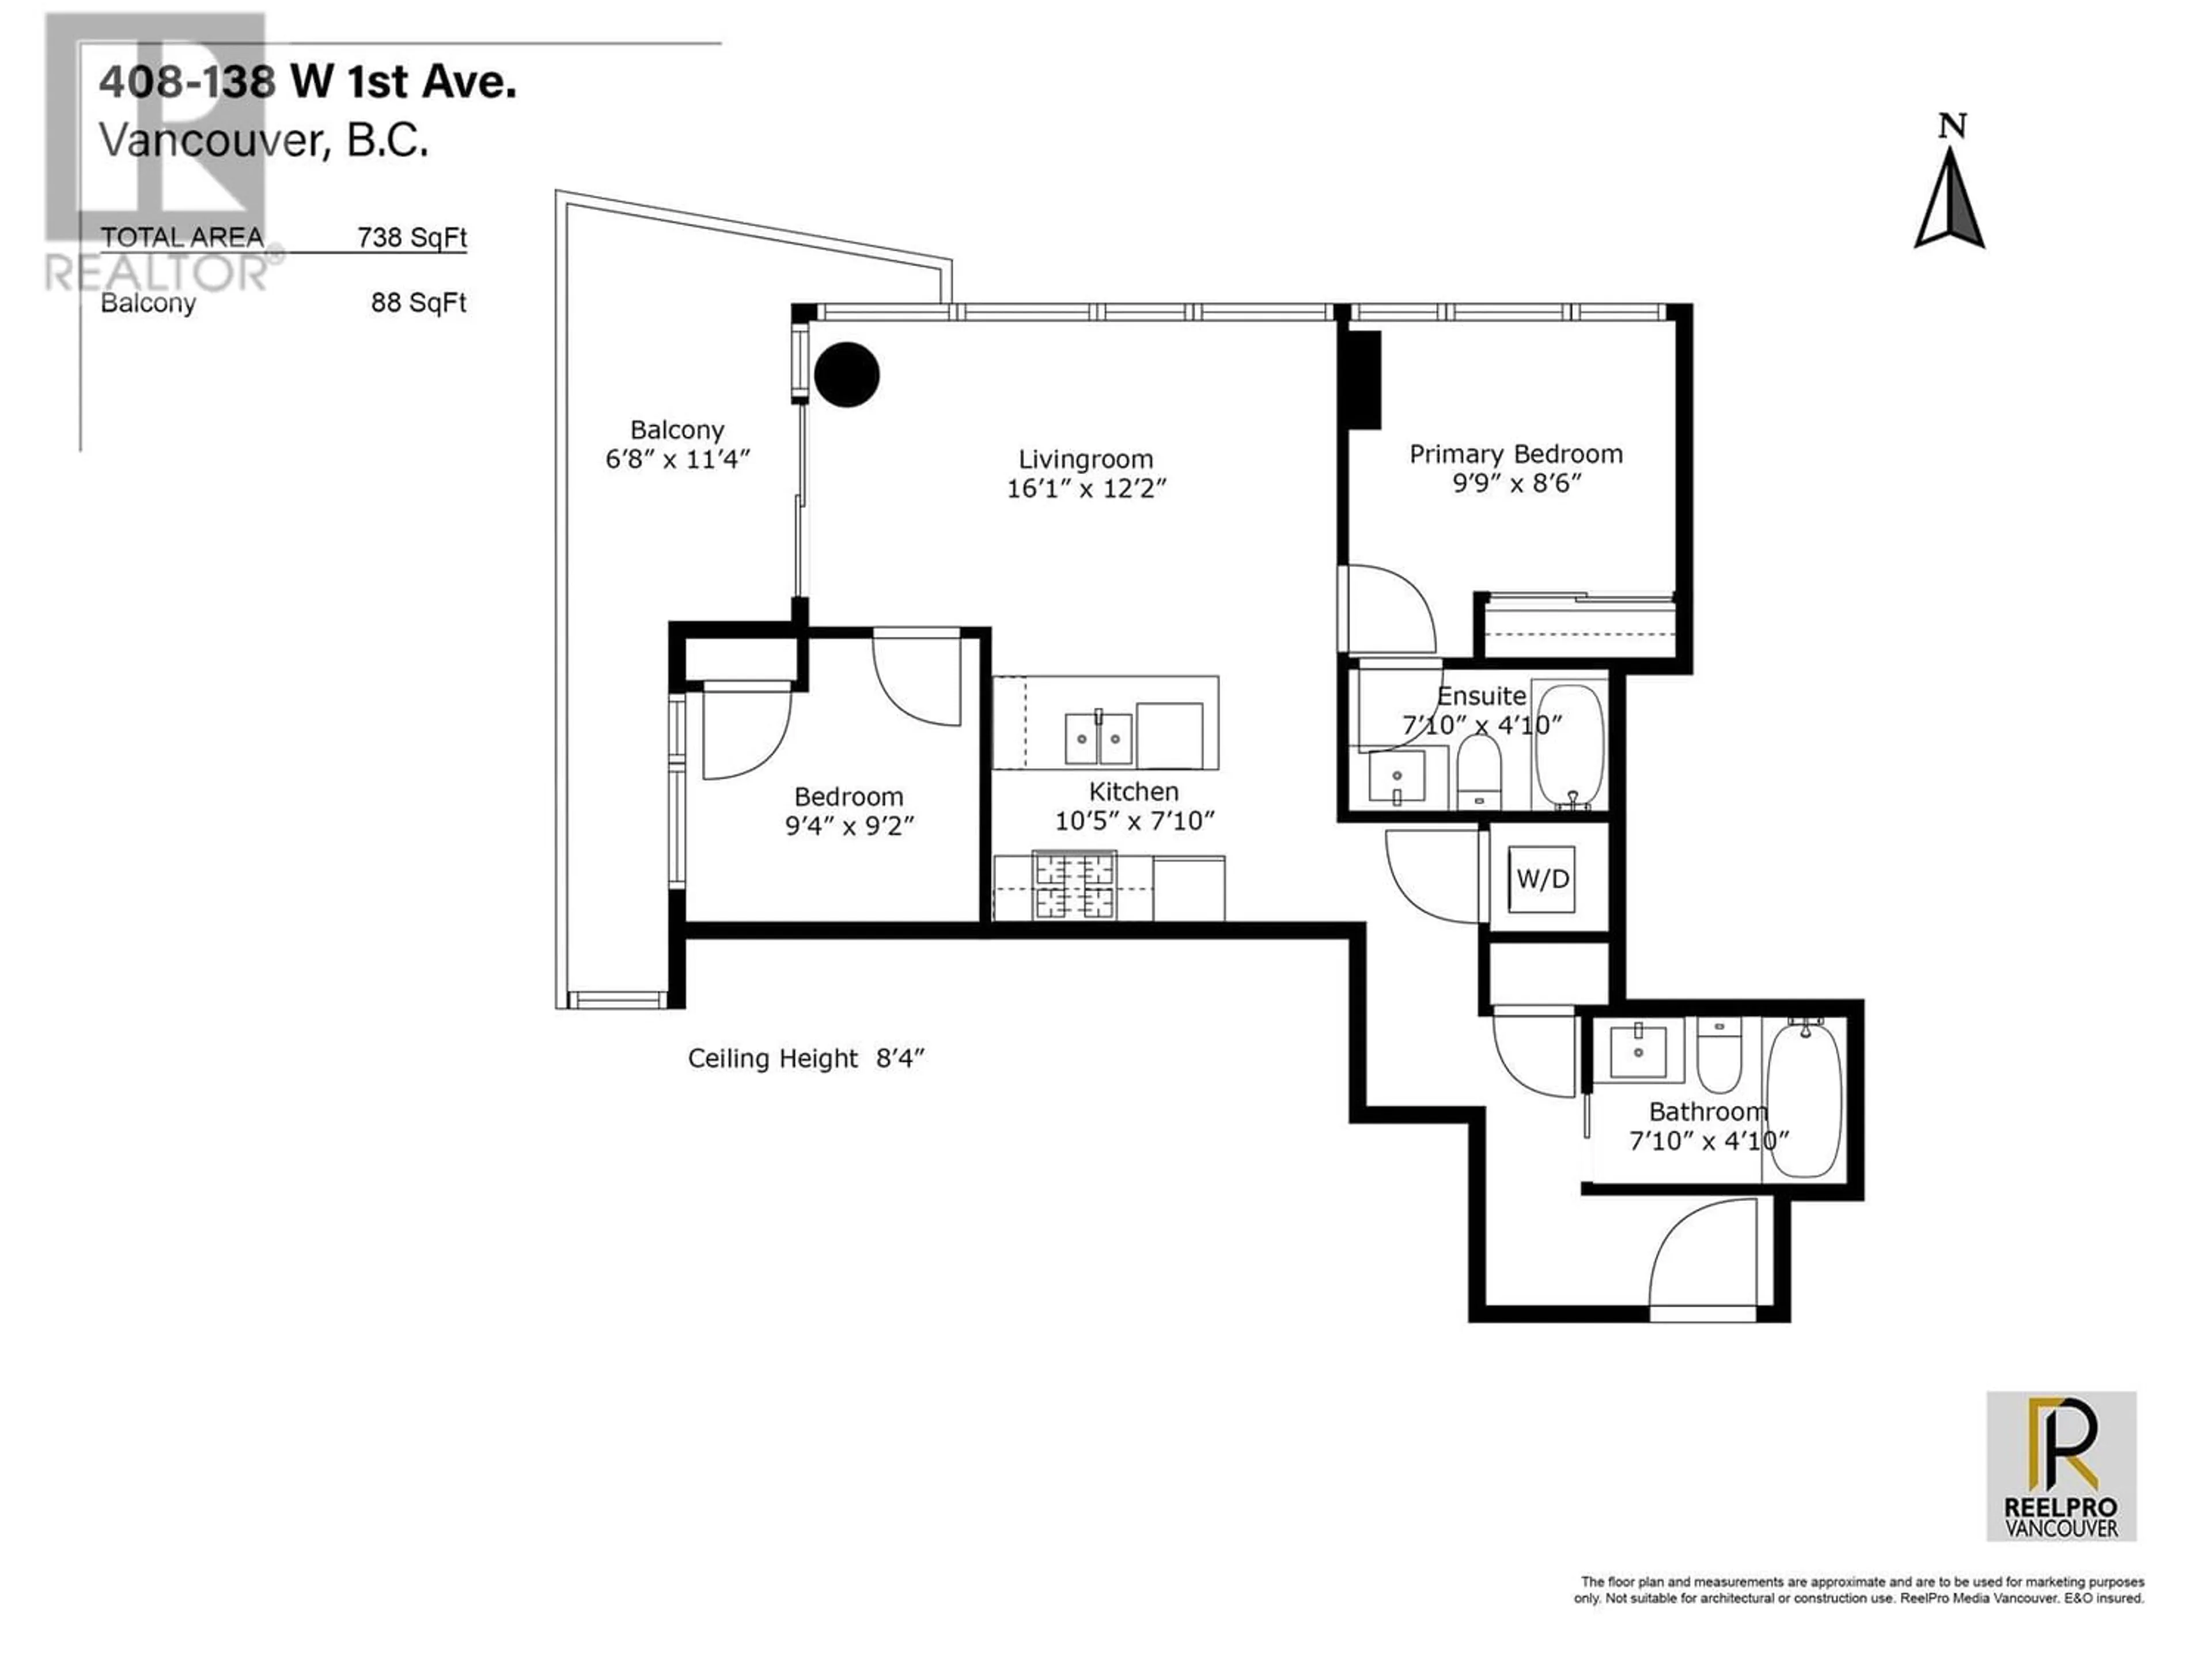 Floor plan for 408 138 W 1ST AVENUE, Vancouver British Columbia V5Y0H5